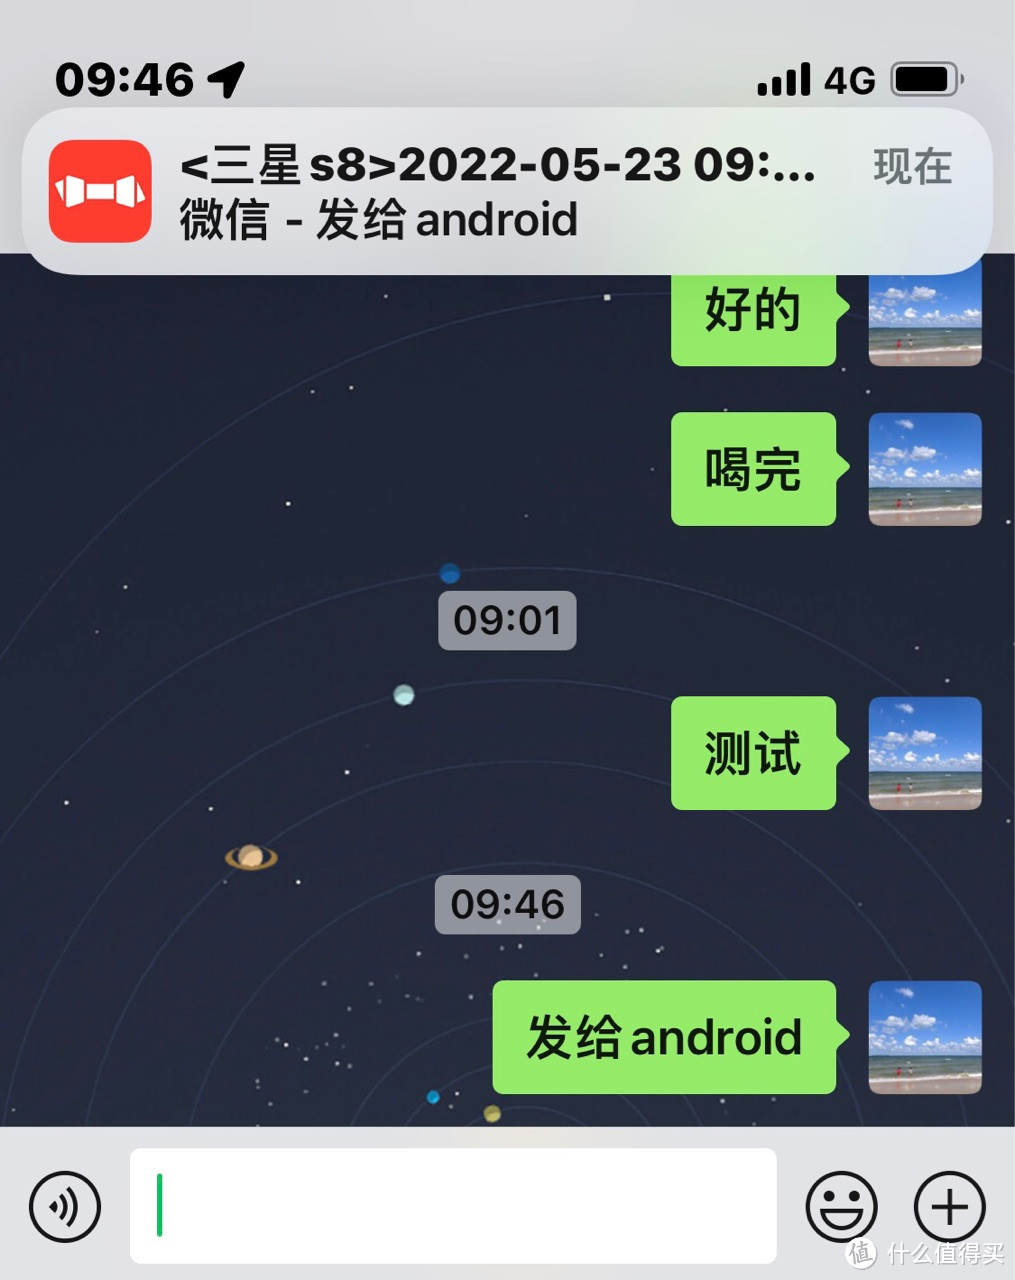 iPhone发送测试信息到Android微信